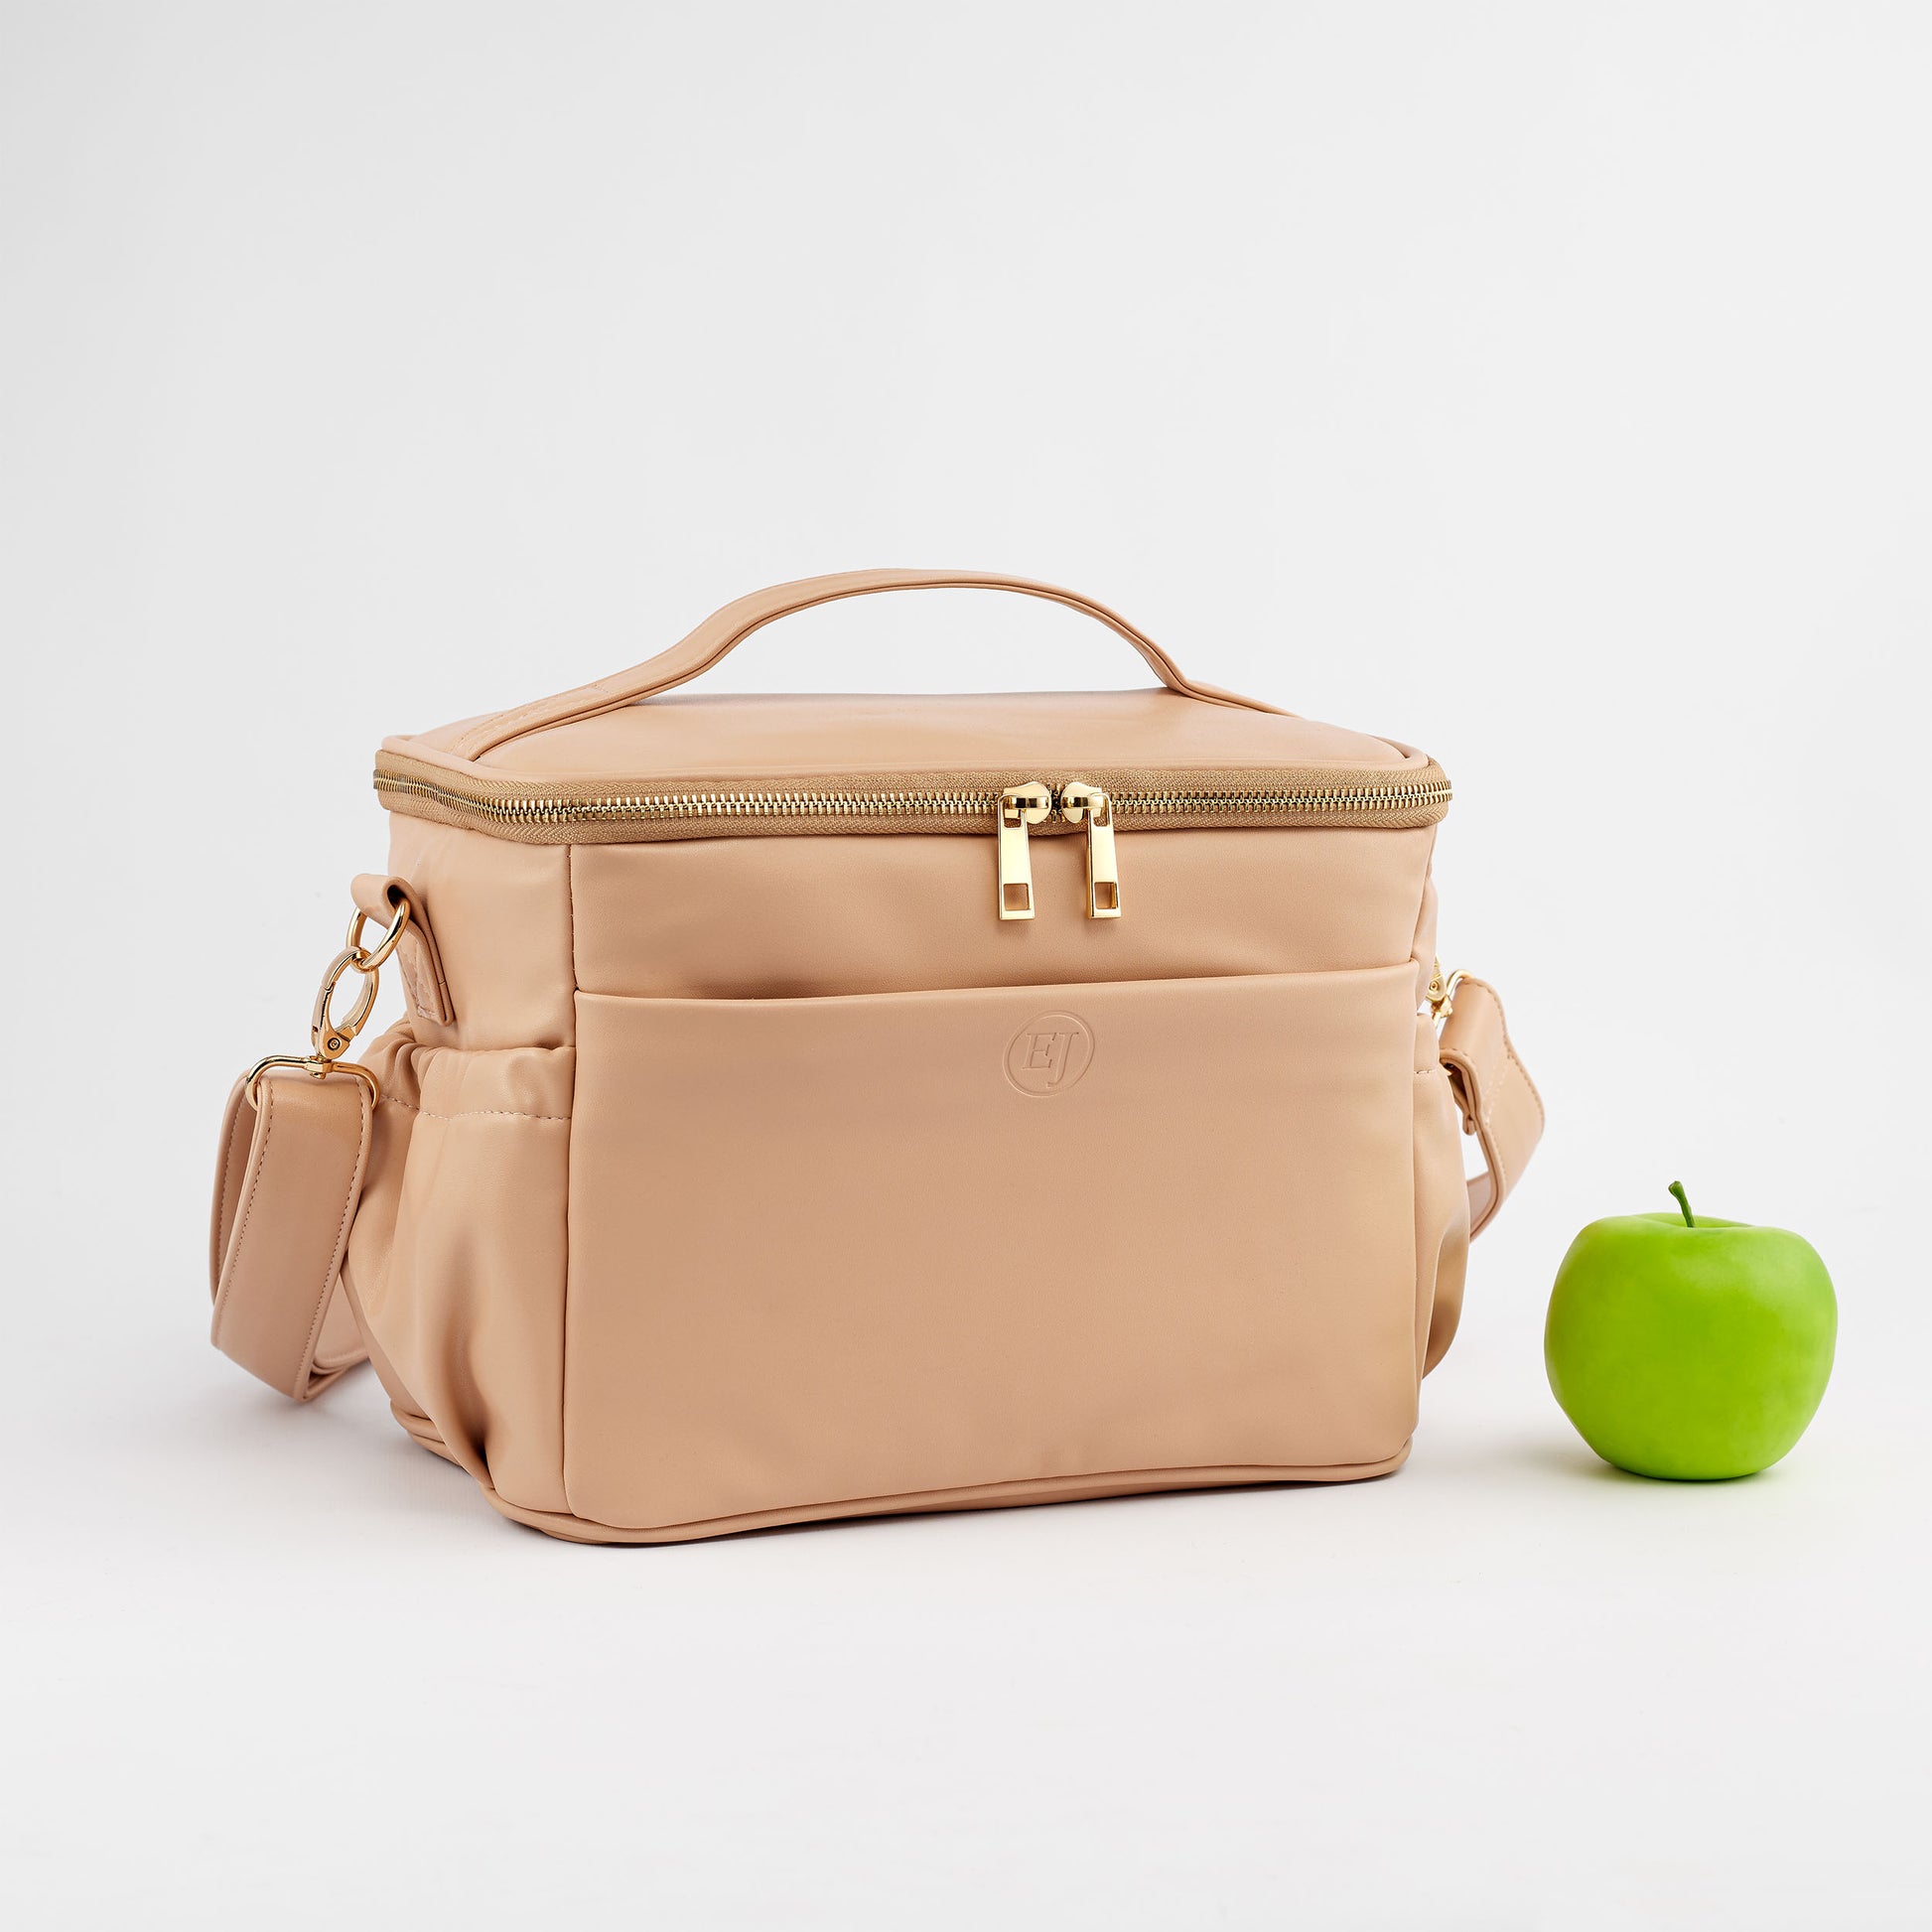 Premium Insulated Lunch Bag, Cruelty-Free and Waterproof Faux Leather - Caramel Beige